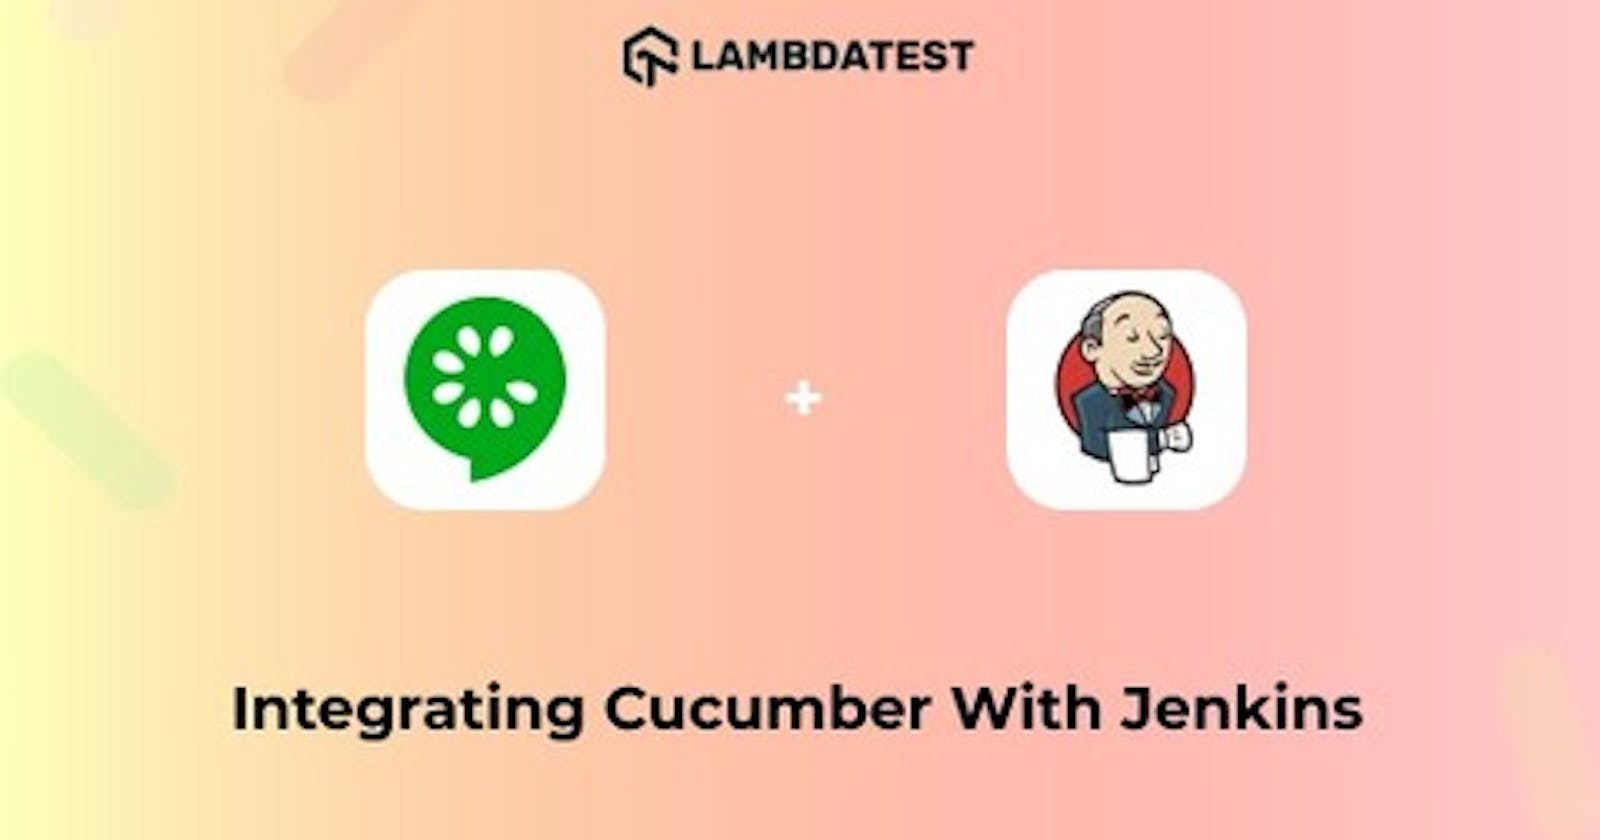 How To Integrate Cucumber With Jenkins?